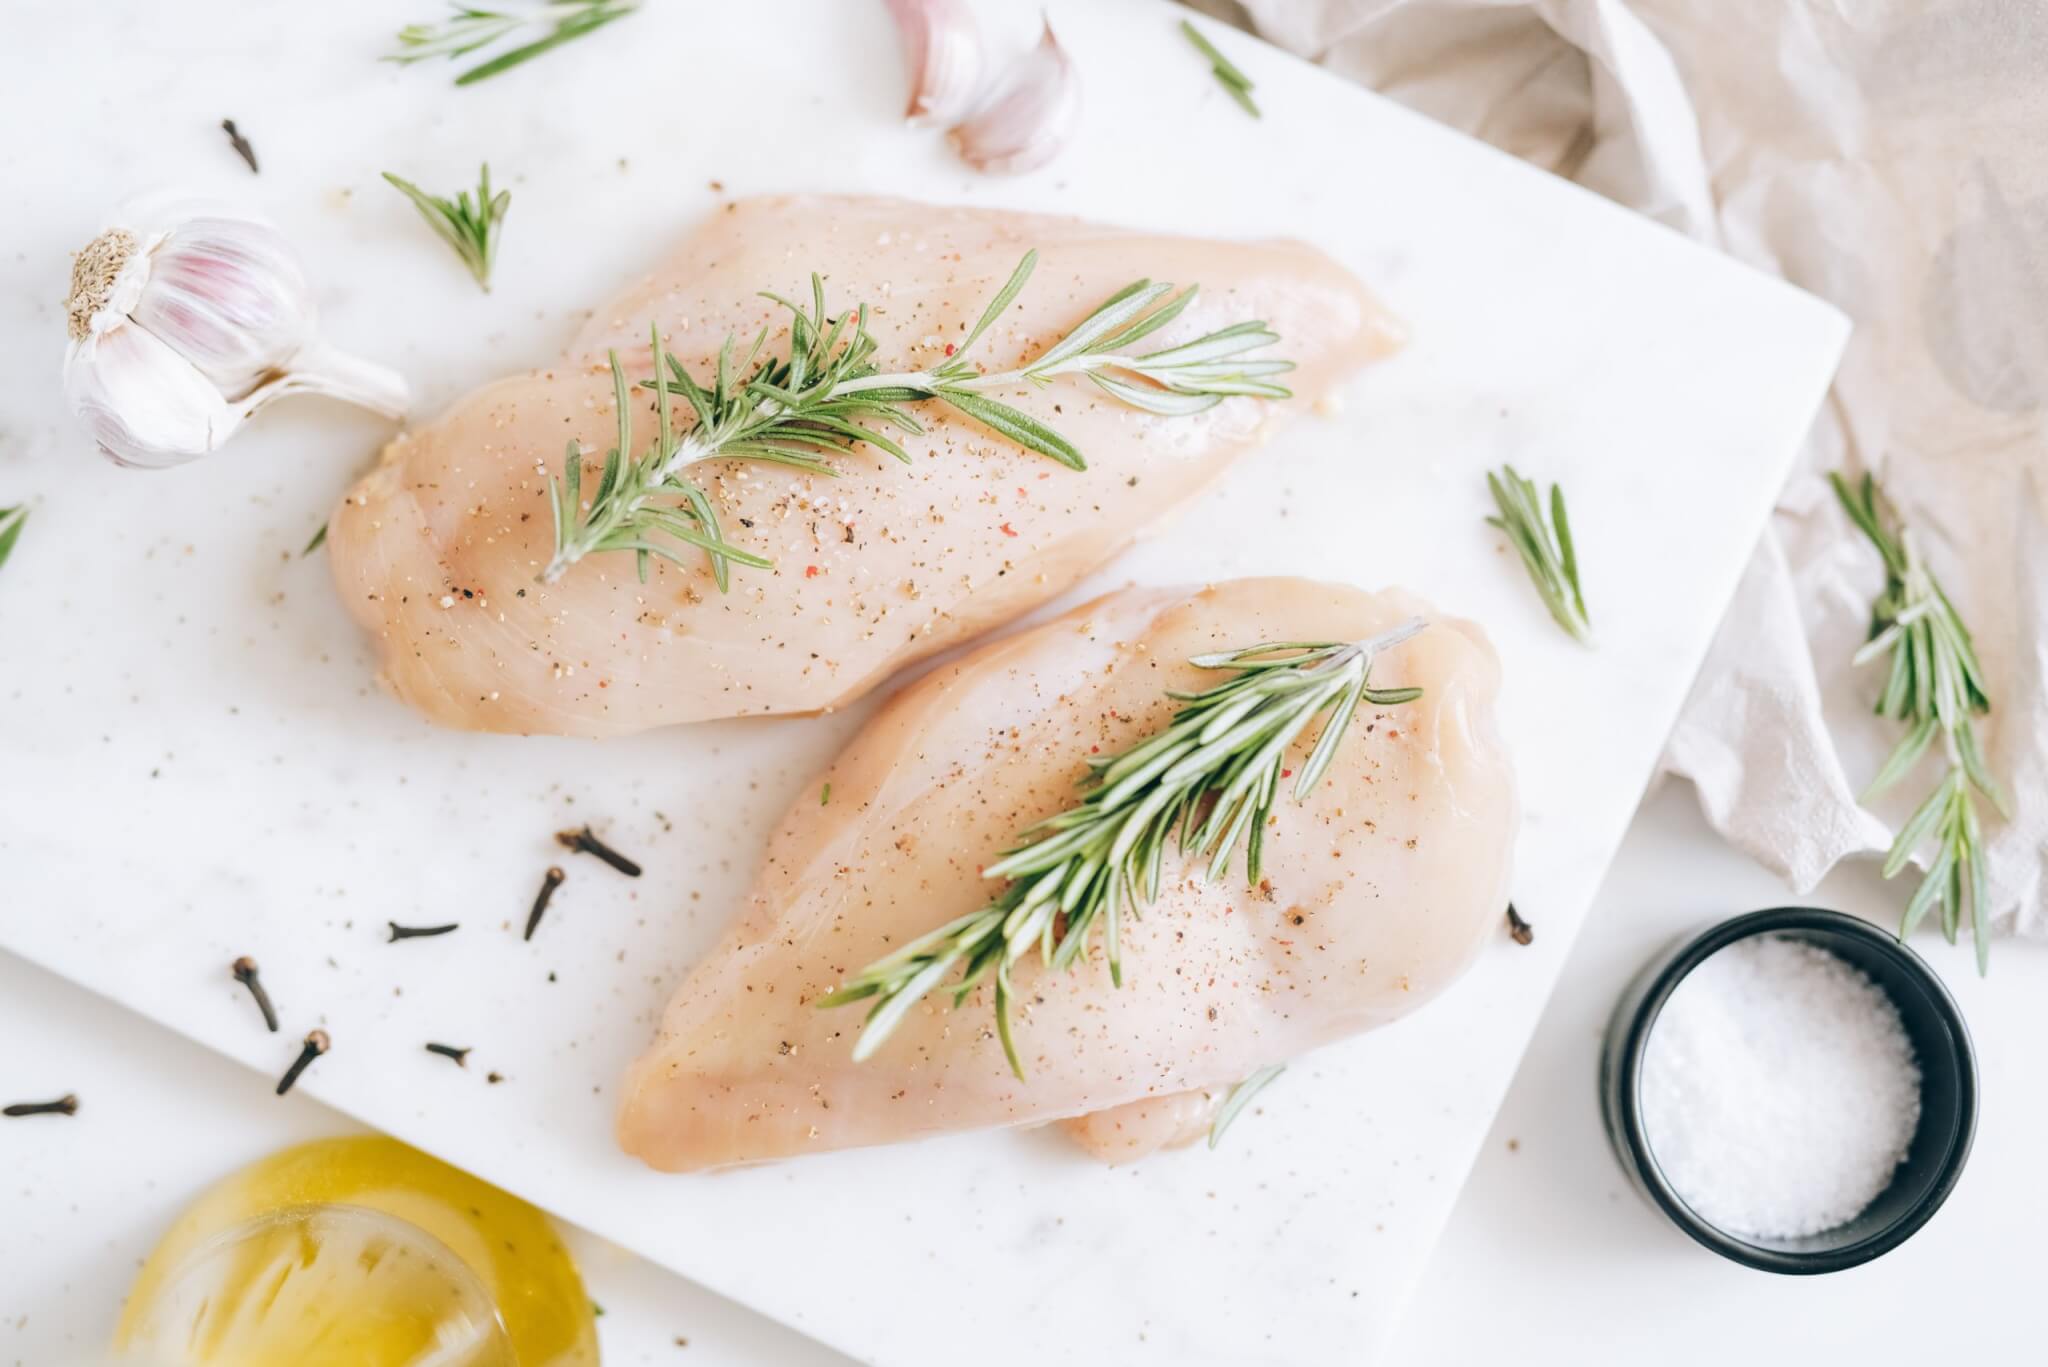 https://studyfinds.org/wp-content/uploads/2023/01/Raw-chicken-breasts-being-marinated-and-prepared-scaled.jpg